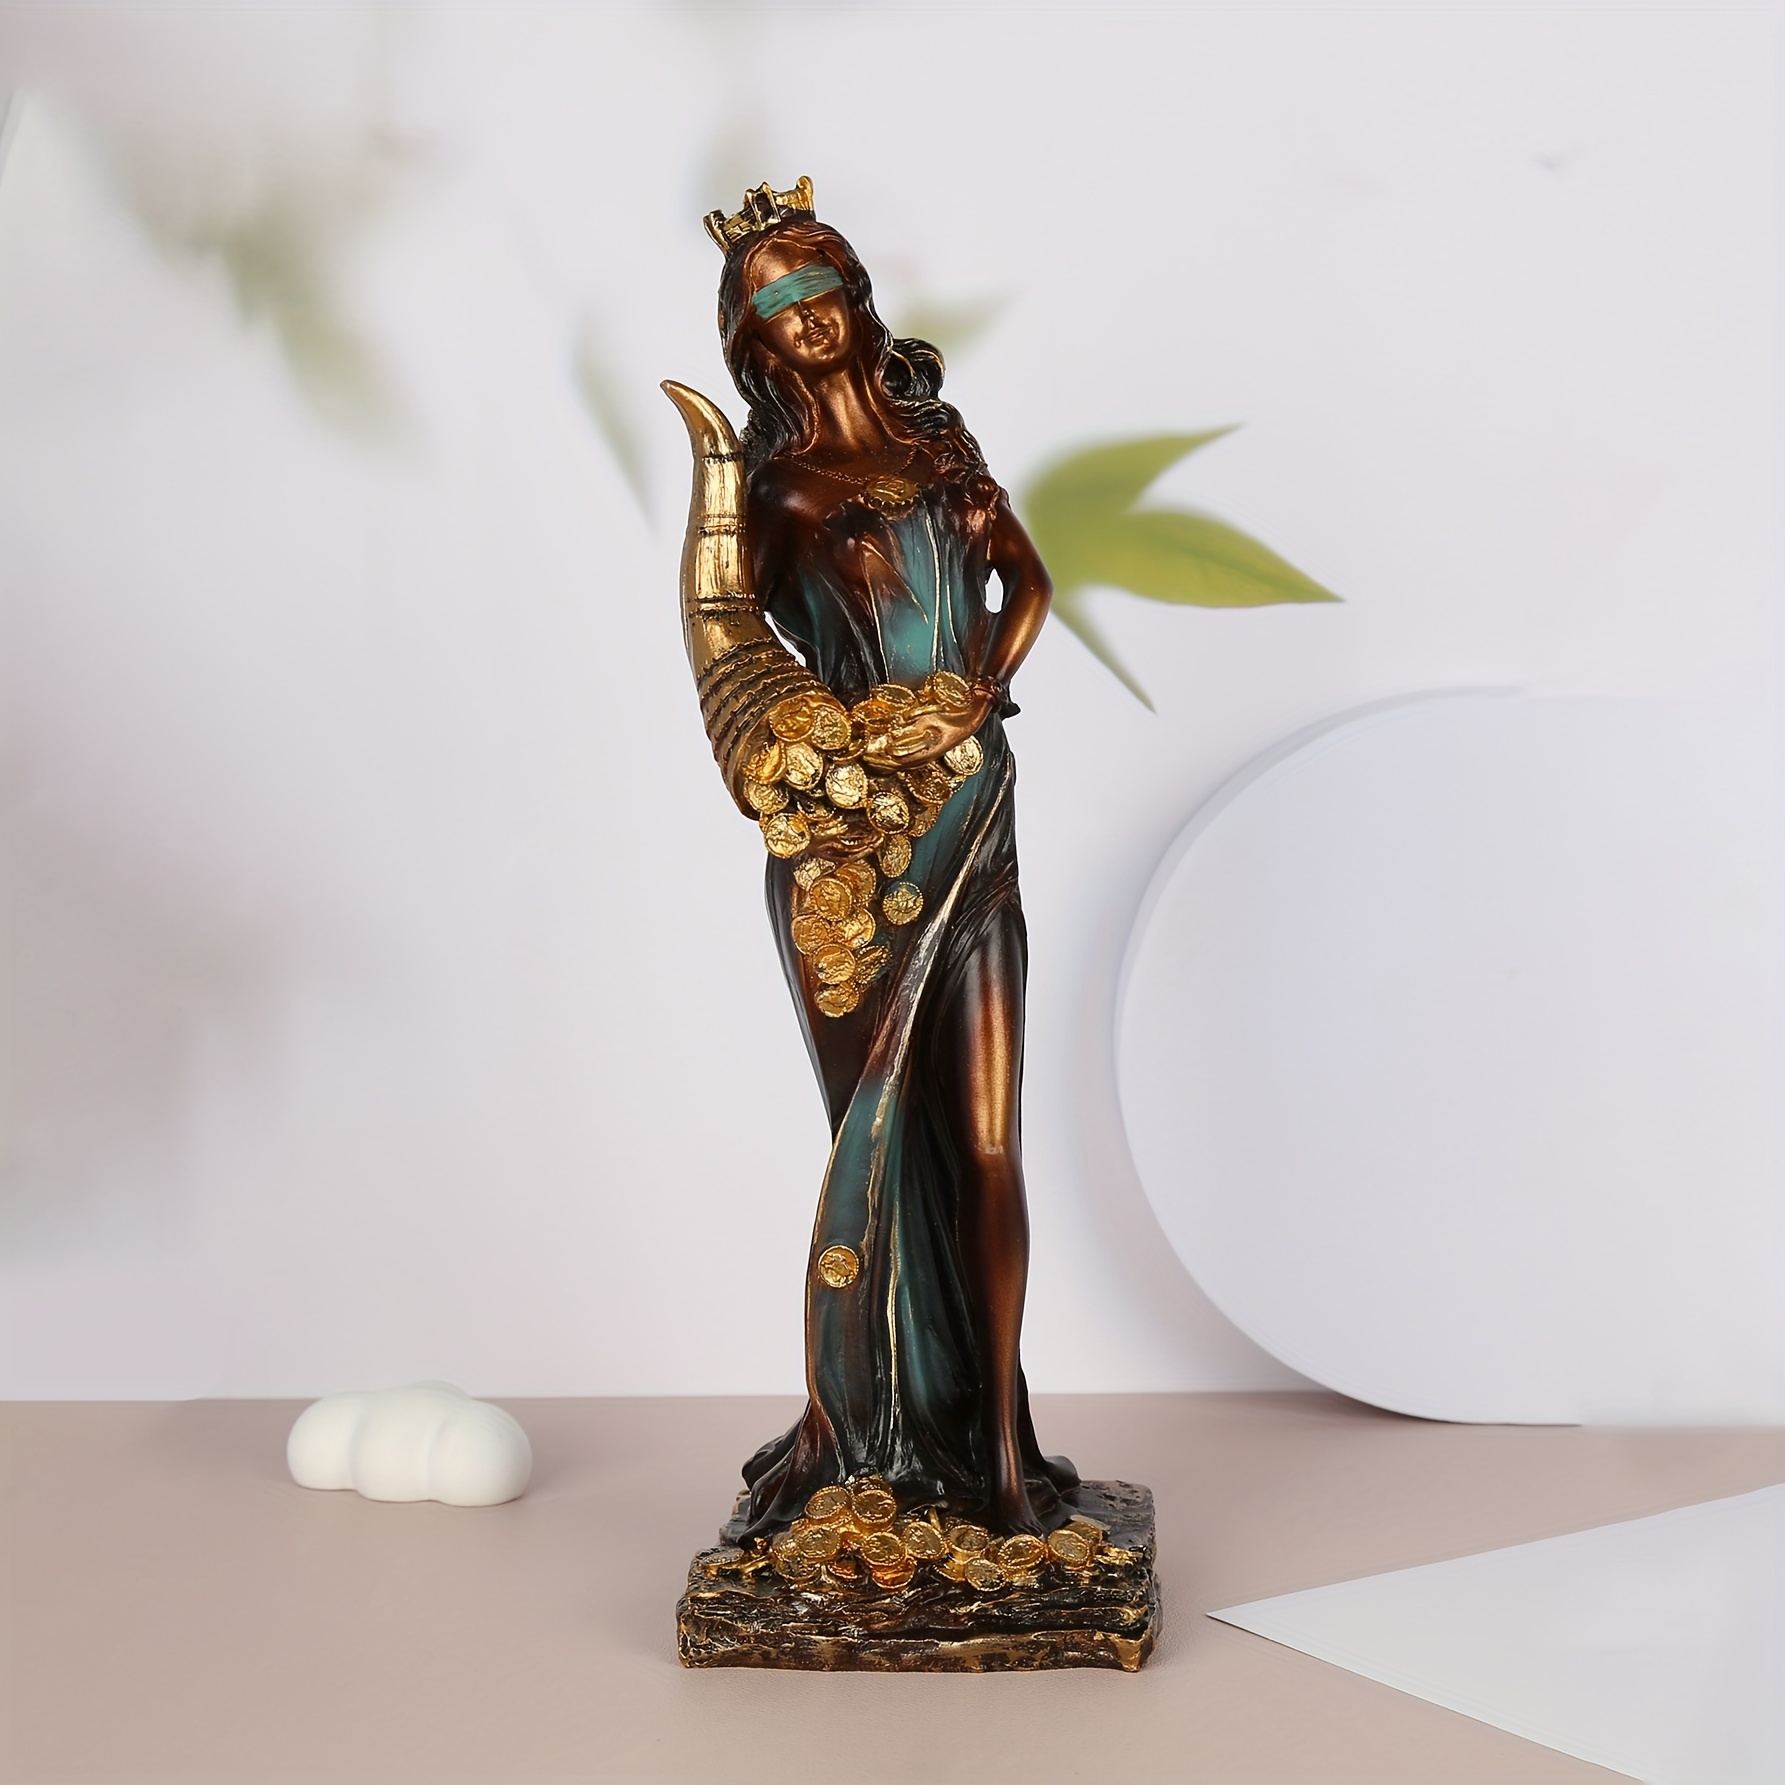 

Vintage Resin Goddess Of Wealth Statue, 1pc Mother's Day Gift, Decorative Figure For Home Office Tabletop, Antique Style Sculpture For Outdoor Use Without Electricity - People/figures Theme